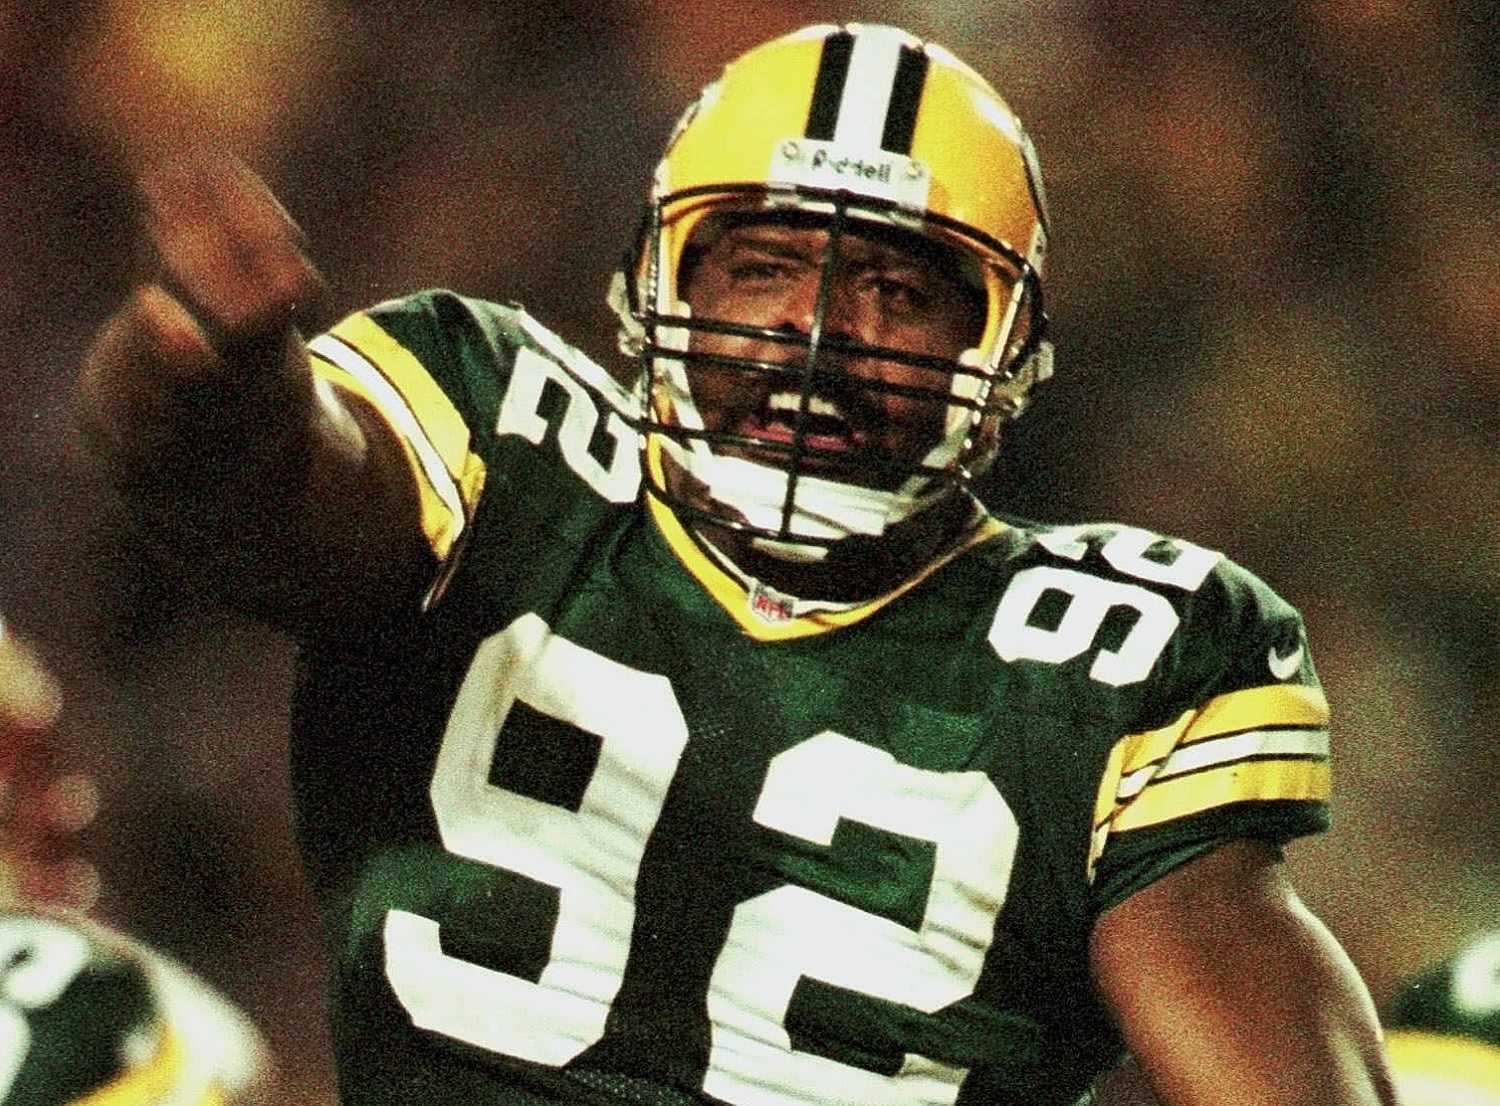 Green Bay Packers defensive end Reggie White reacts after sacking San Francisco 49ers quarterback Steve Young in the fourth quarter of the Packers 36-22 win, Sunday, Nov. 1, 1998, in Green Bay, Wis. Halfway through his farewell season and six weeks shy of his 37th birthday, White is playing like a young man again.     His 11 sacks, as many as he had all of last season, have him on pace to challenge his career-best of 21, which he set in 1987 for the Philadelphia Eagles. (AP Photo/Morry Gash)